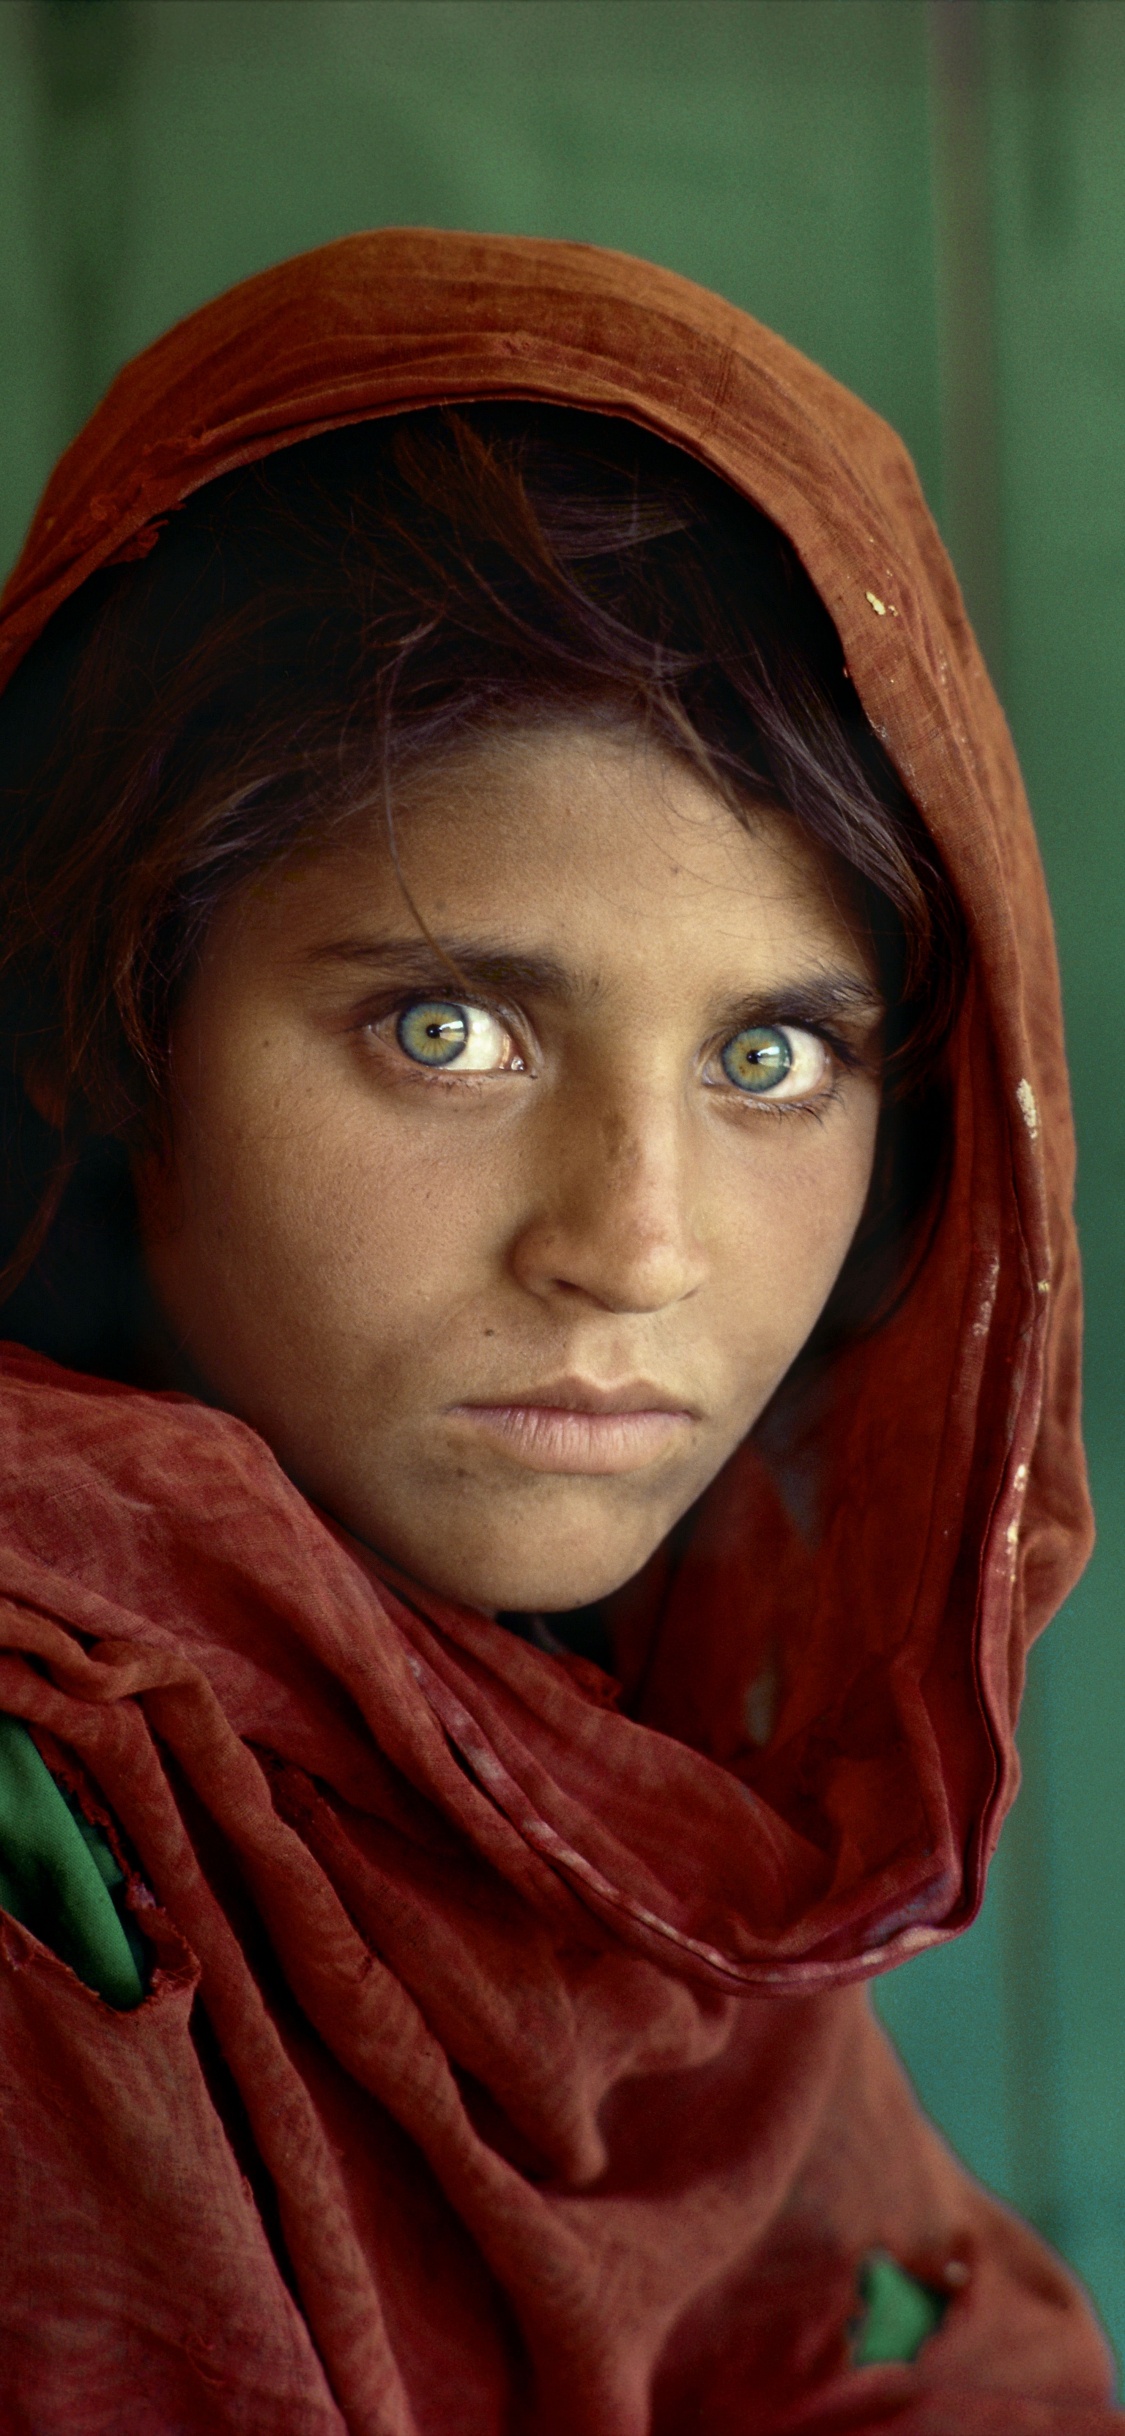 Afghan Girl, Afghanistan, National Geographic, Face, Eye. Wallpaper in 1125x2436 Resolution